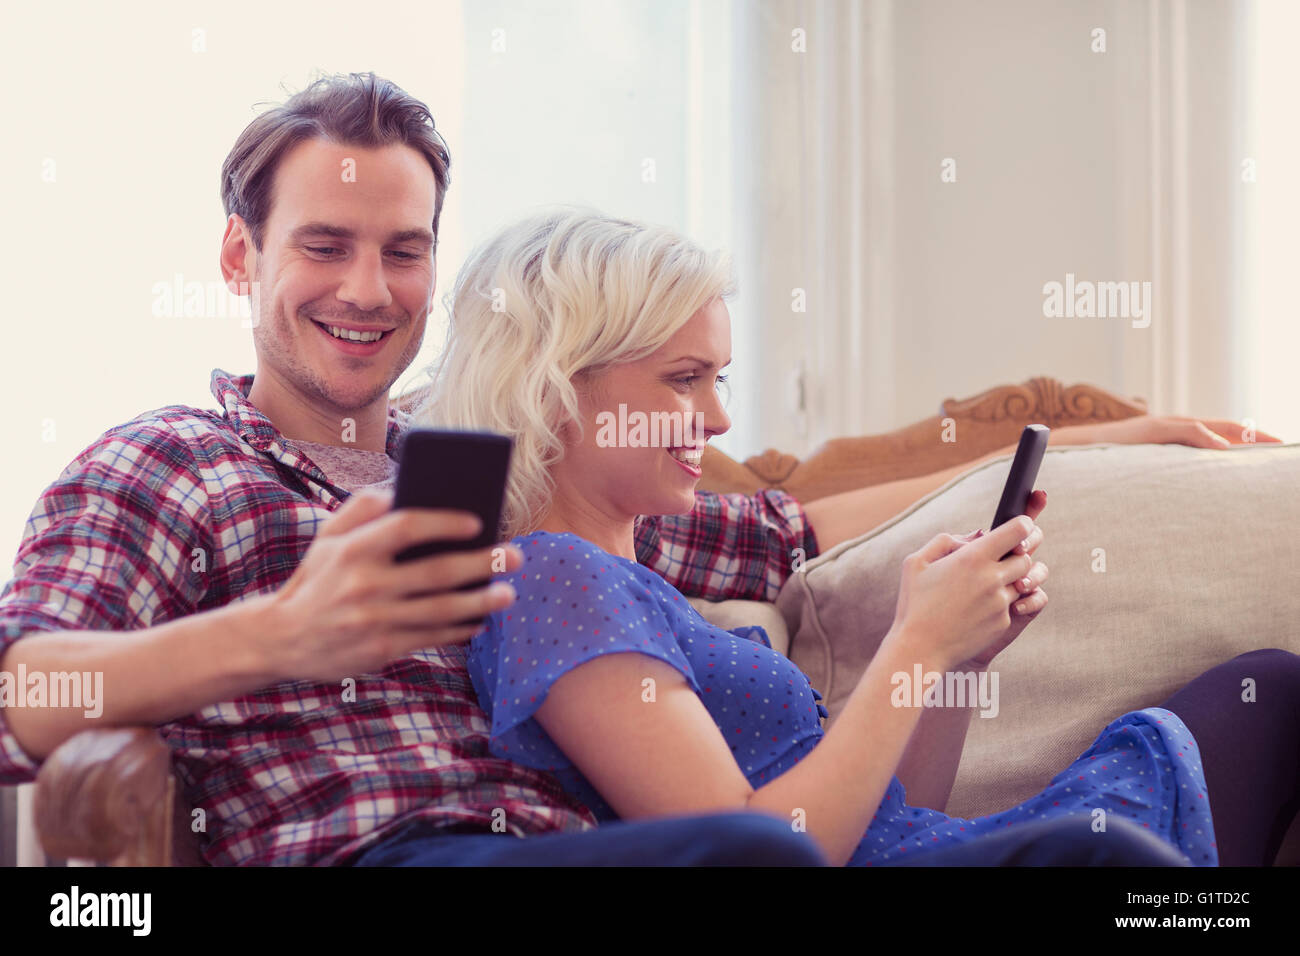 Couple texting with cell phones on living room sofa Stock Photo